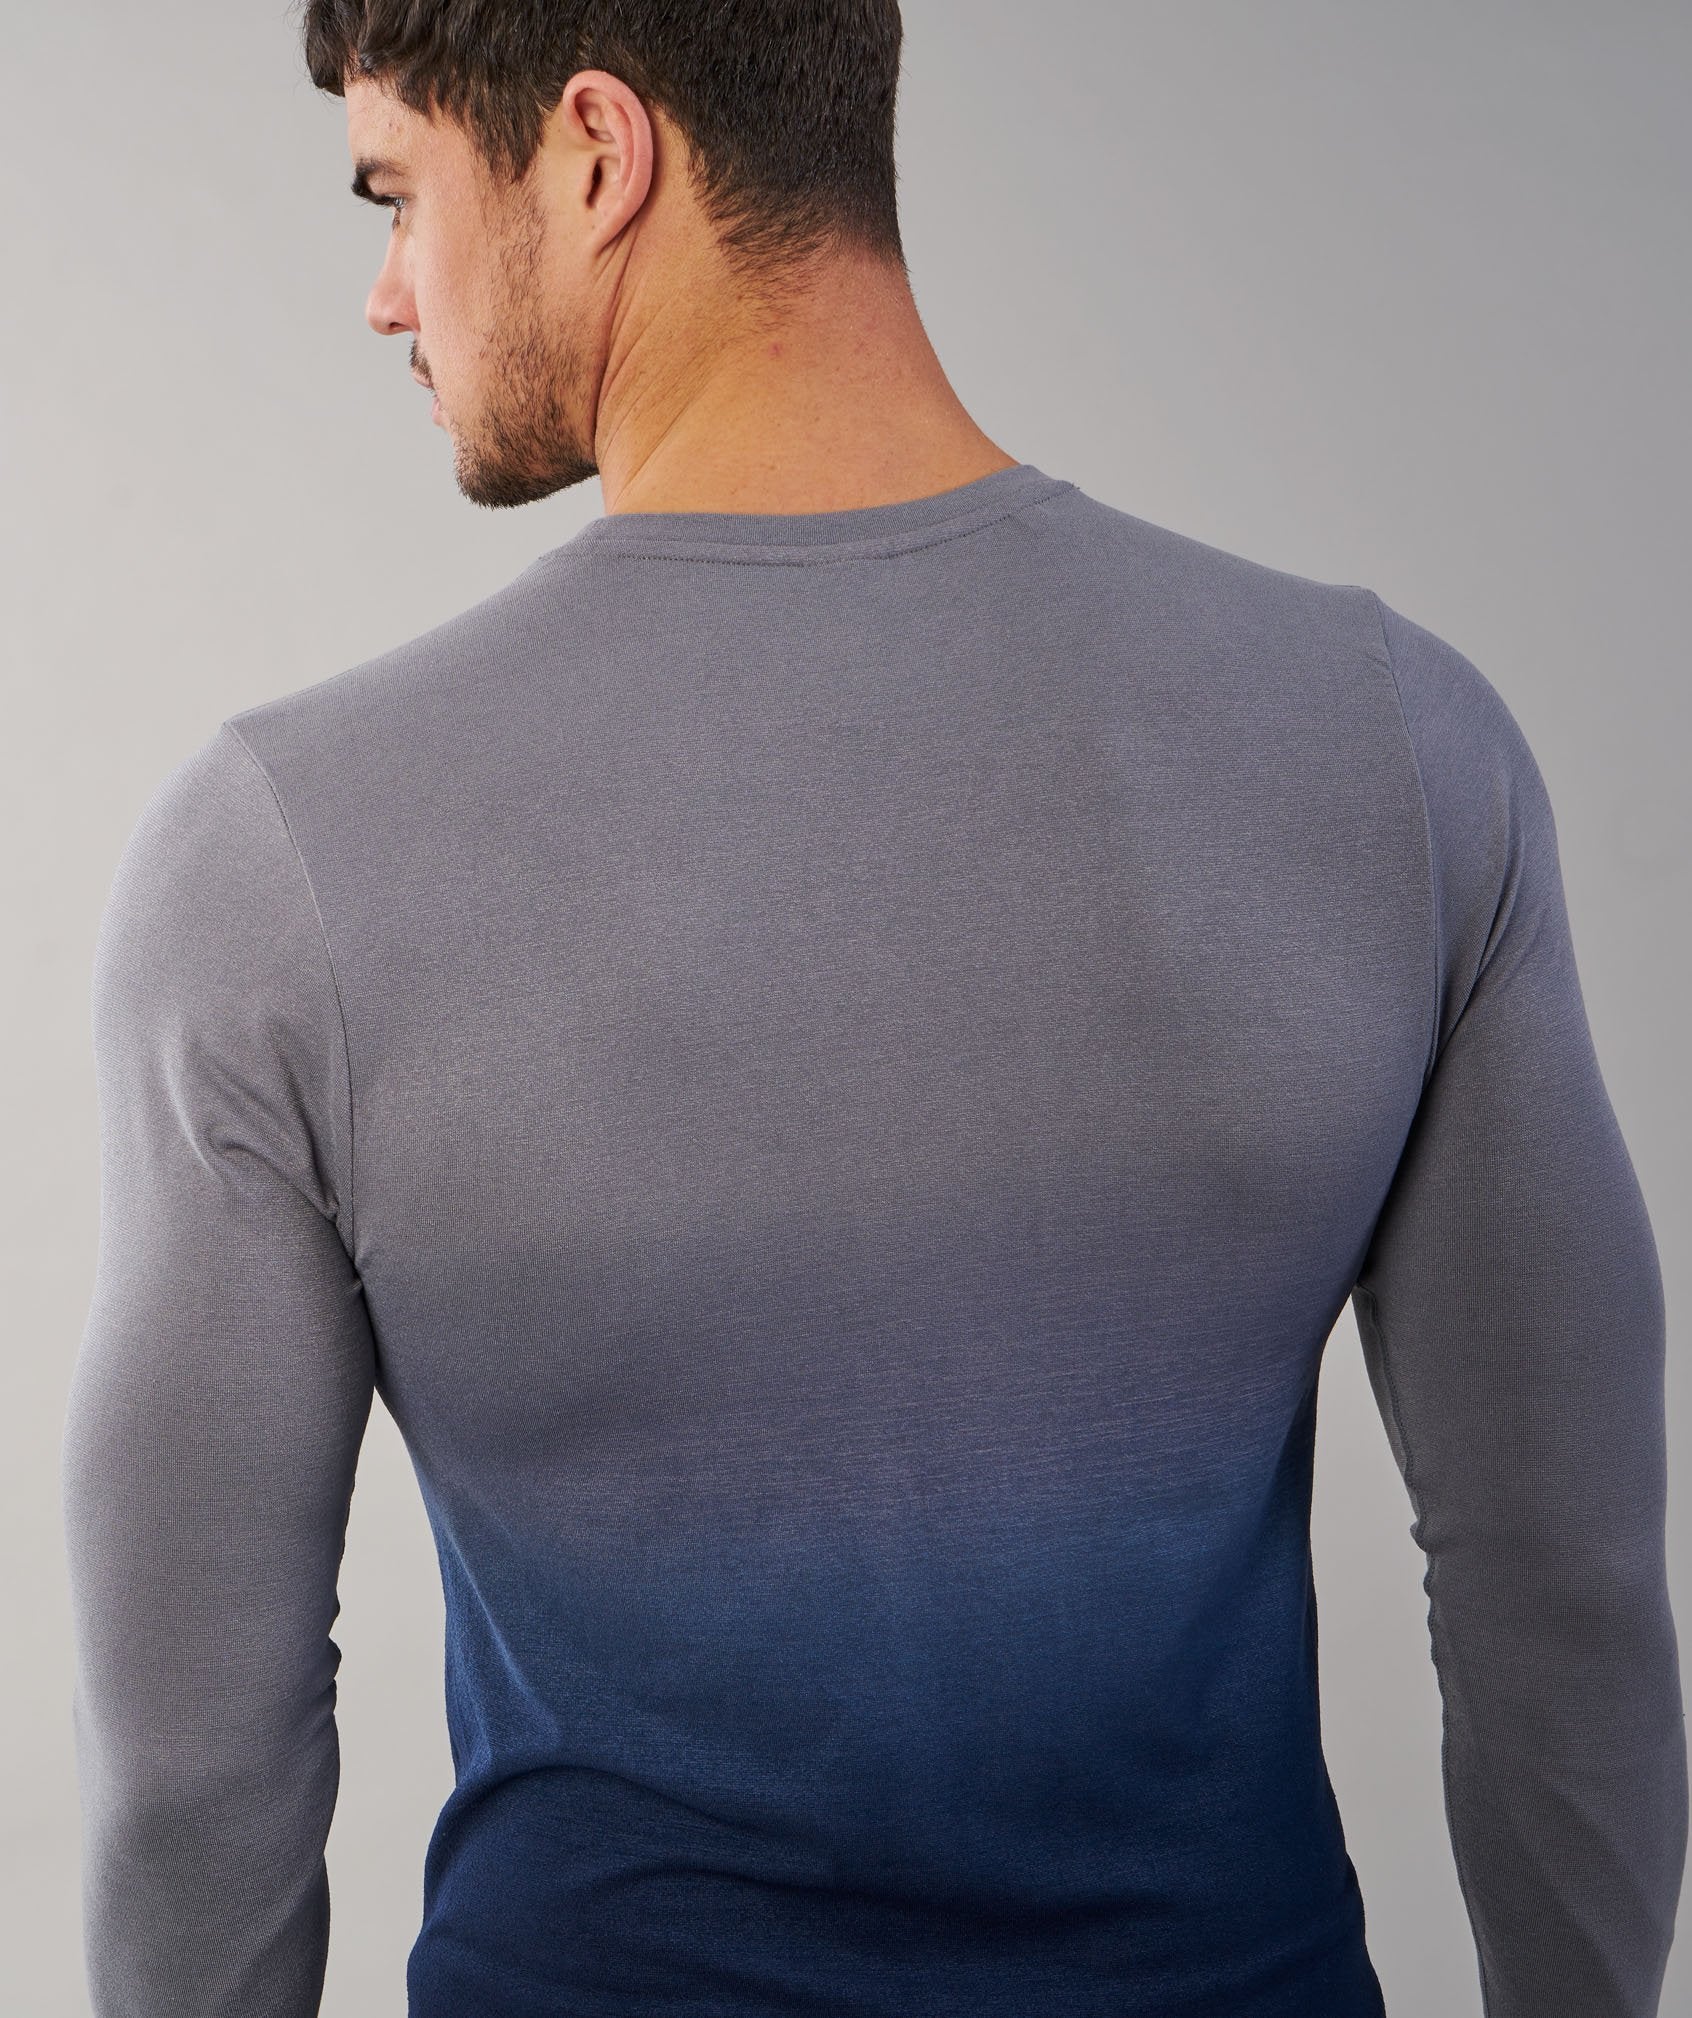 Ombre Long Sleeve T-Shirt in Light Grey/Sapphire Blue - view 6